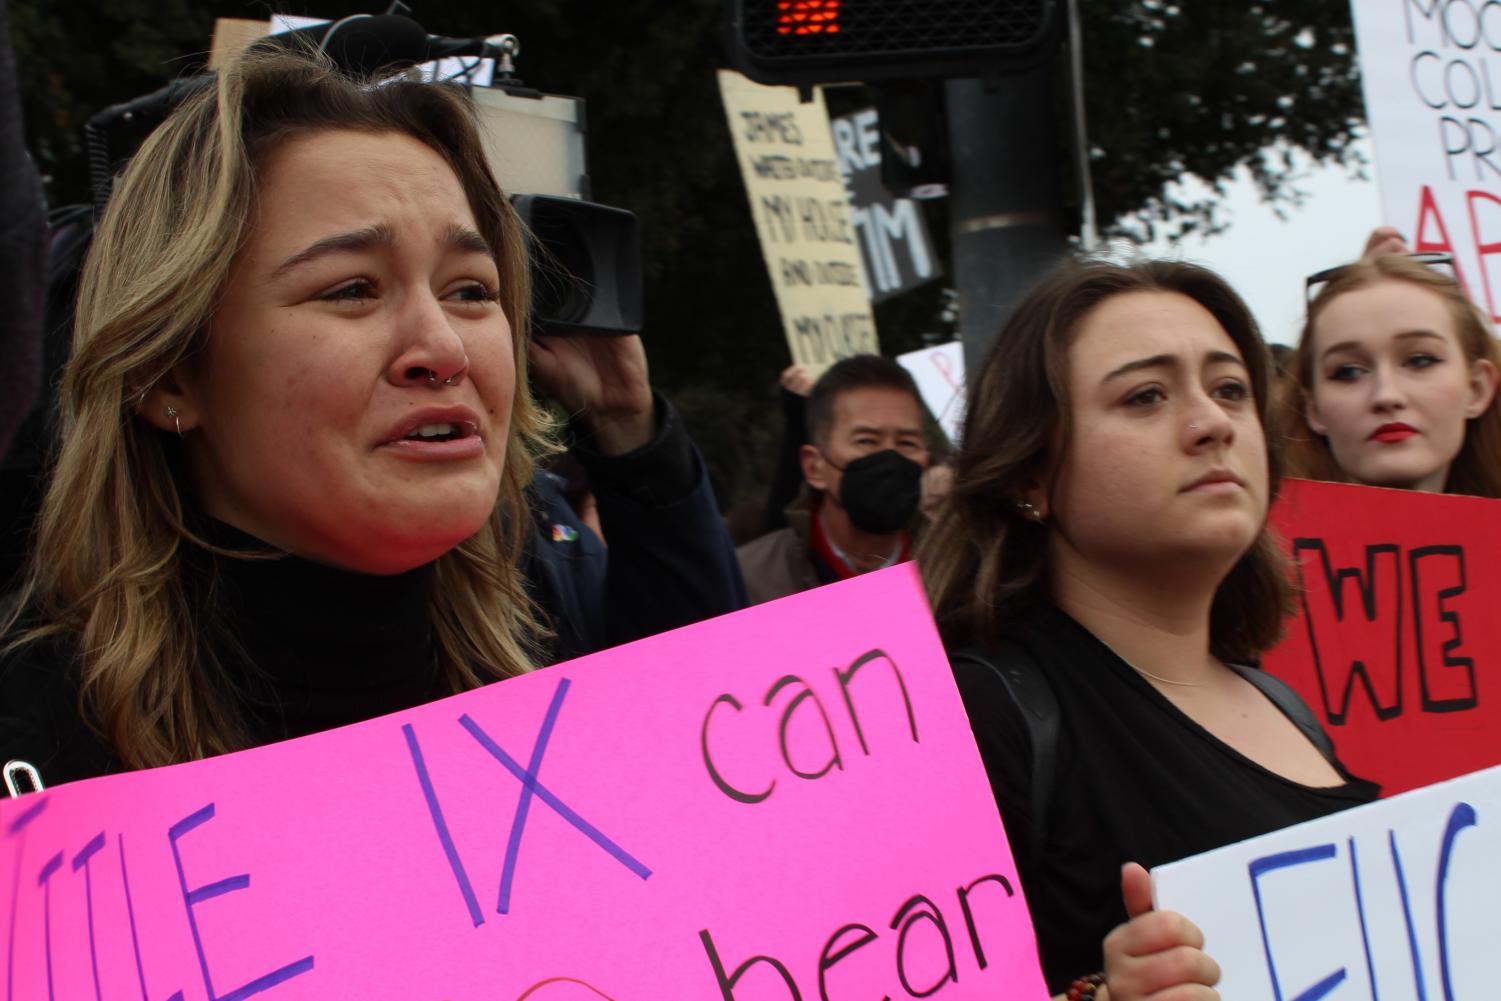 Moorpark College students Isa Rojas, Oliva Vasquez and Ella Boring hold up signs protesting Title IX ineffectiveness and the college administration on Dec. 15, 2022. The protest took place just outside the college campus at the intersection of Collins Drive and Campus Drive in Moorpark, CA.